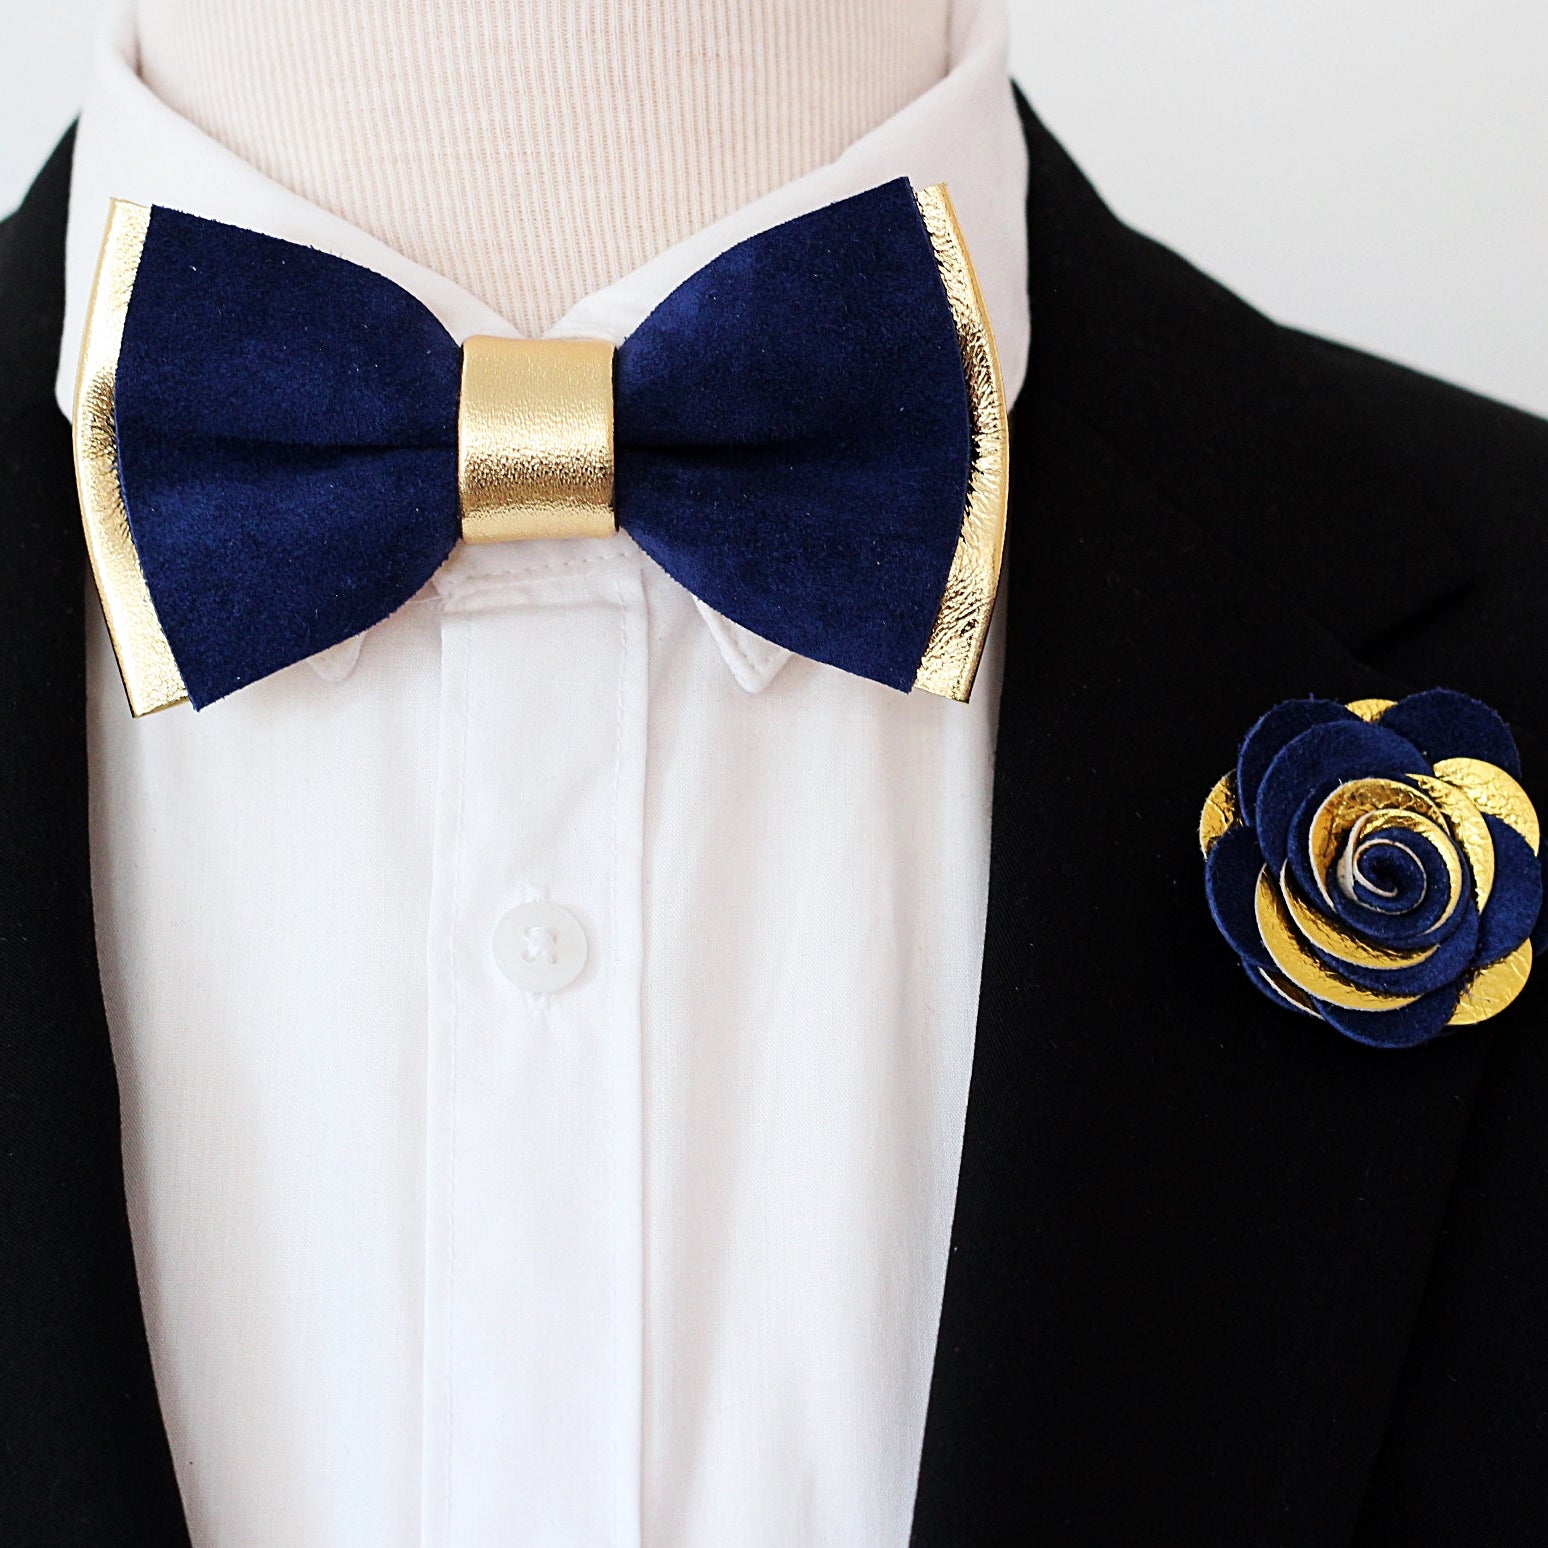 Grooms in Navy Suits and Bow Ties